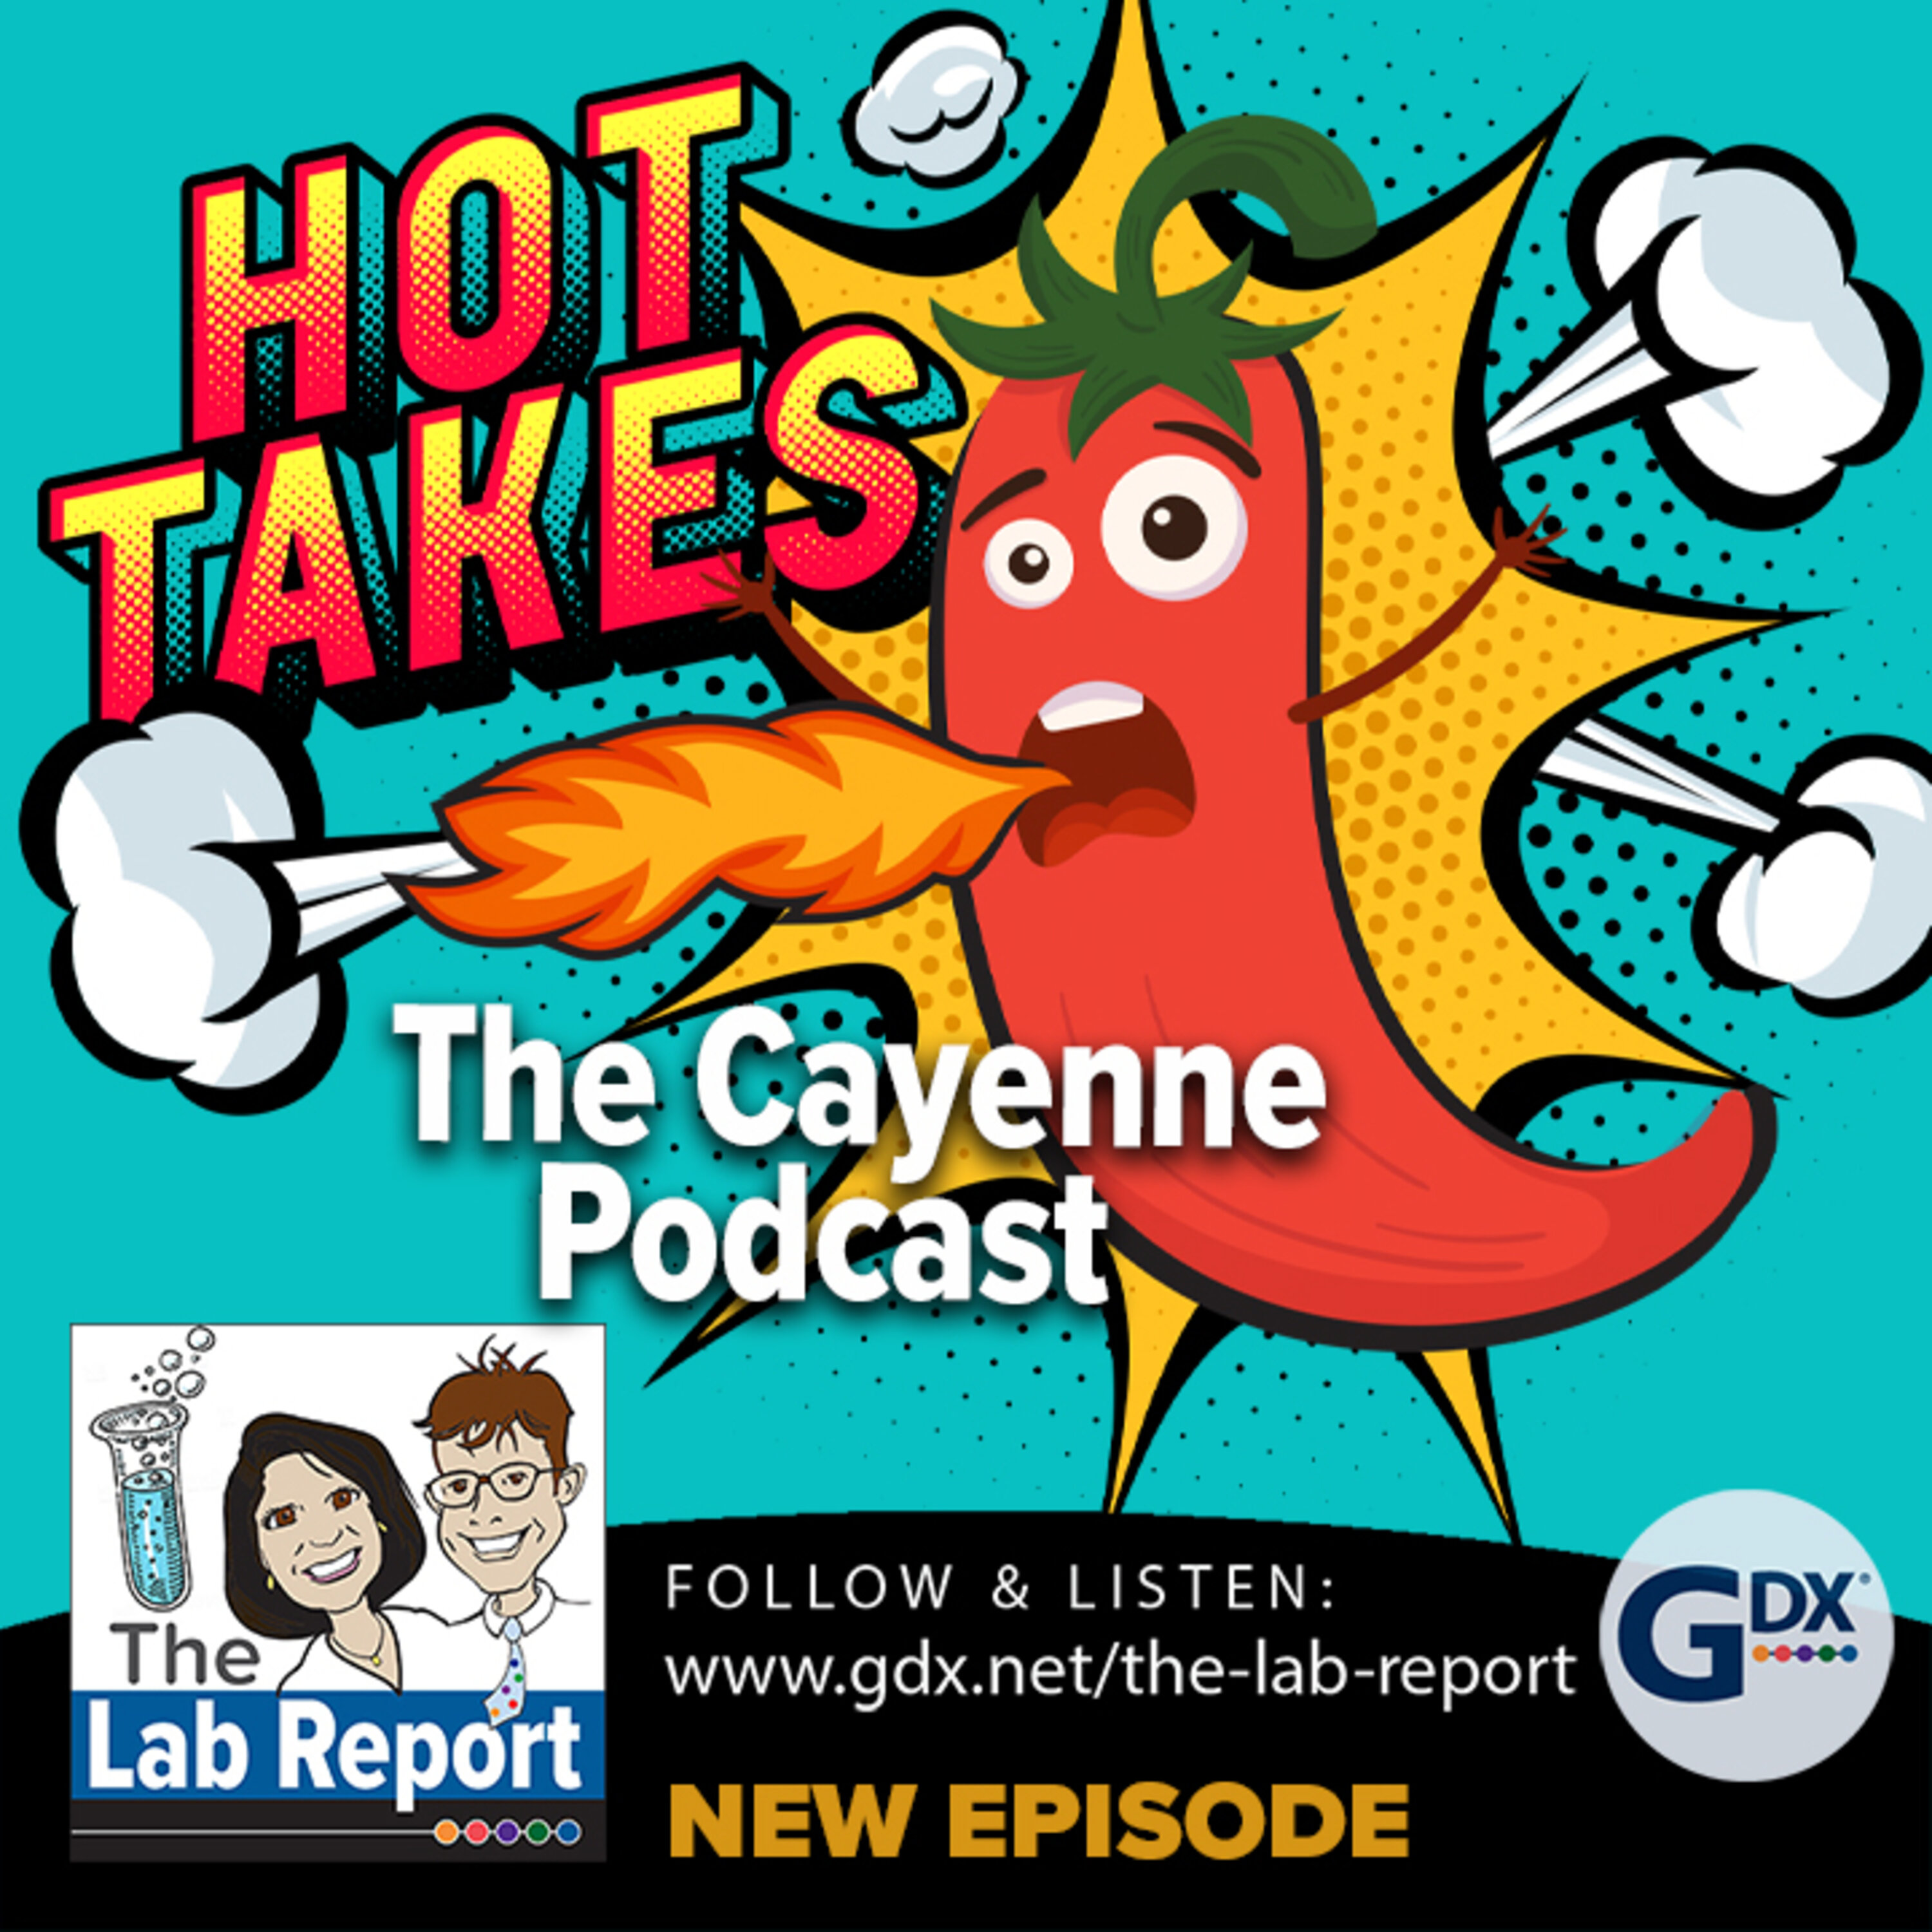 Hot Takes: The Cayenne Podcast